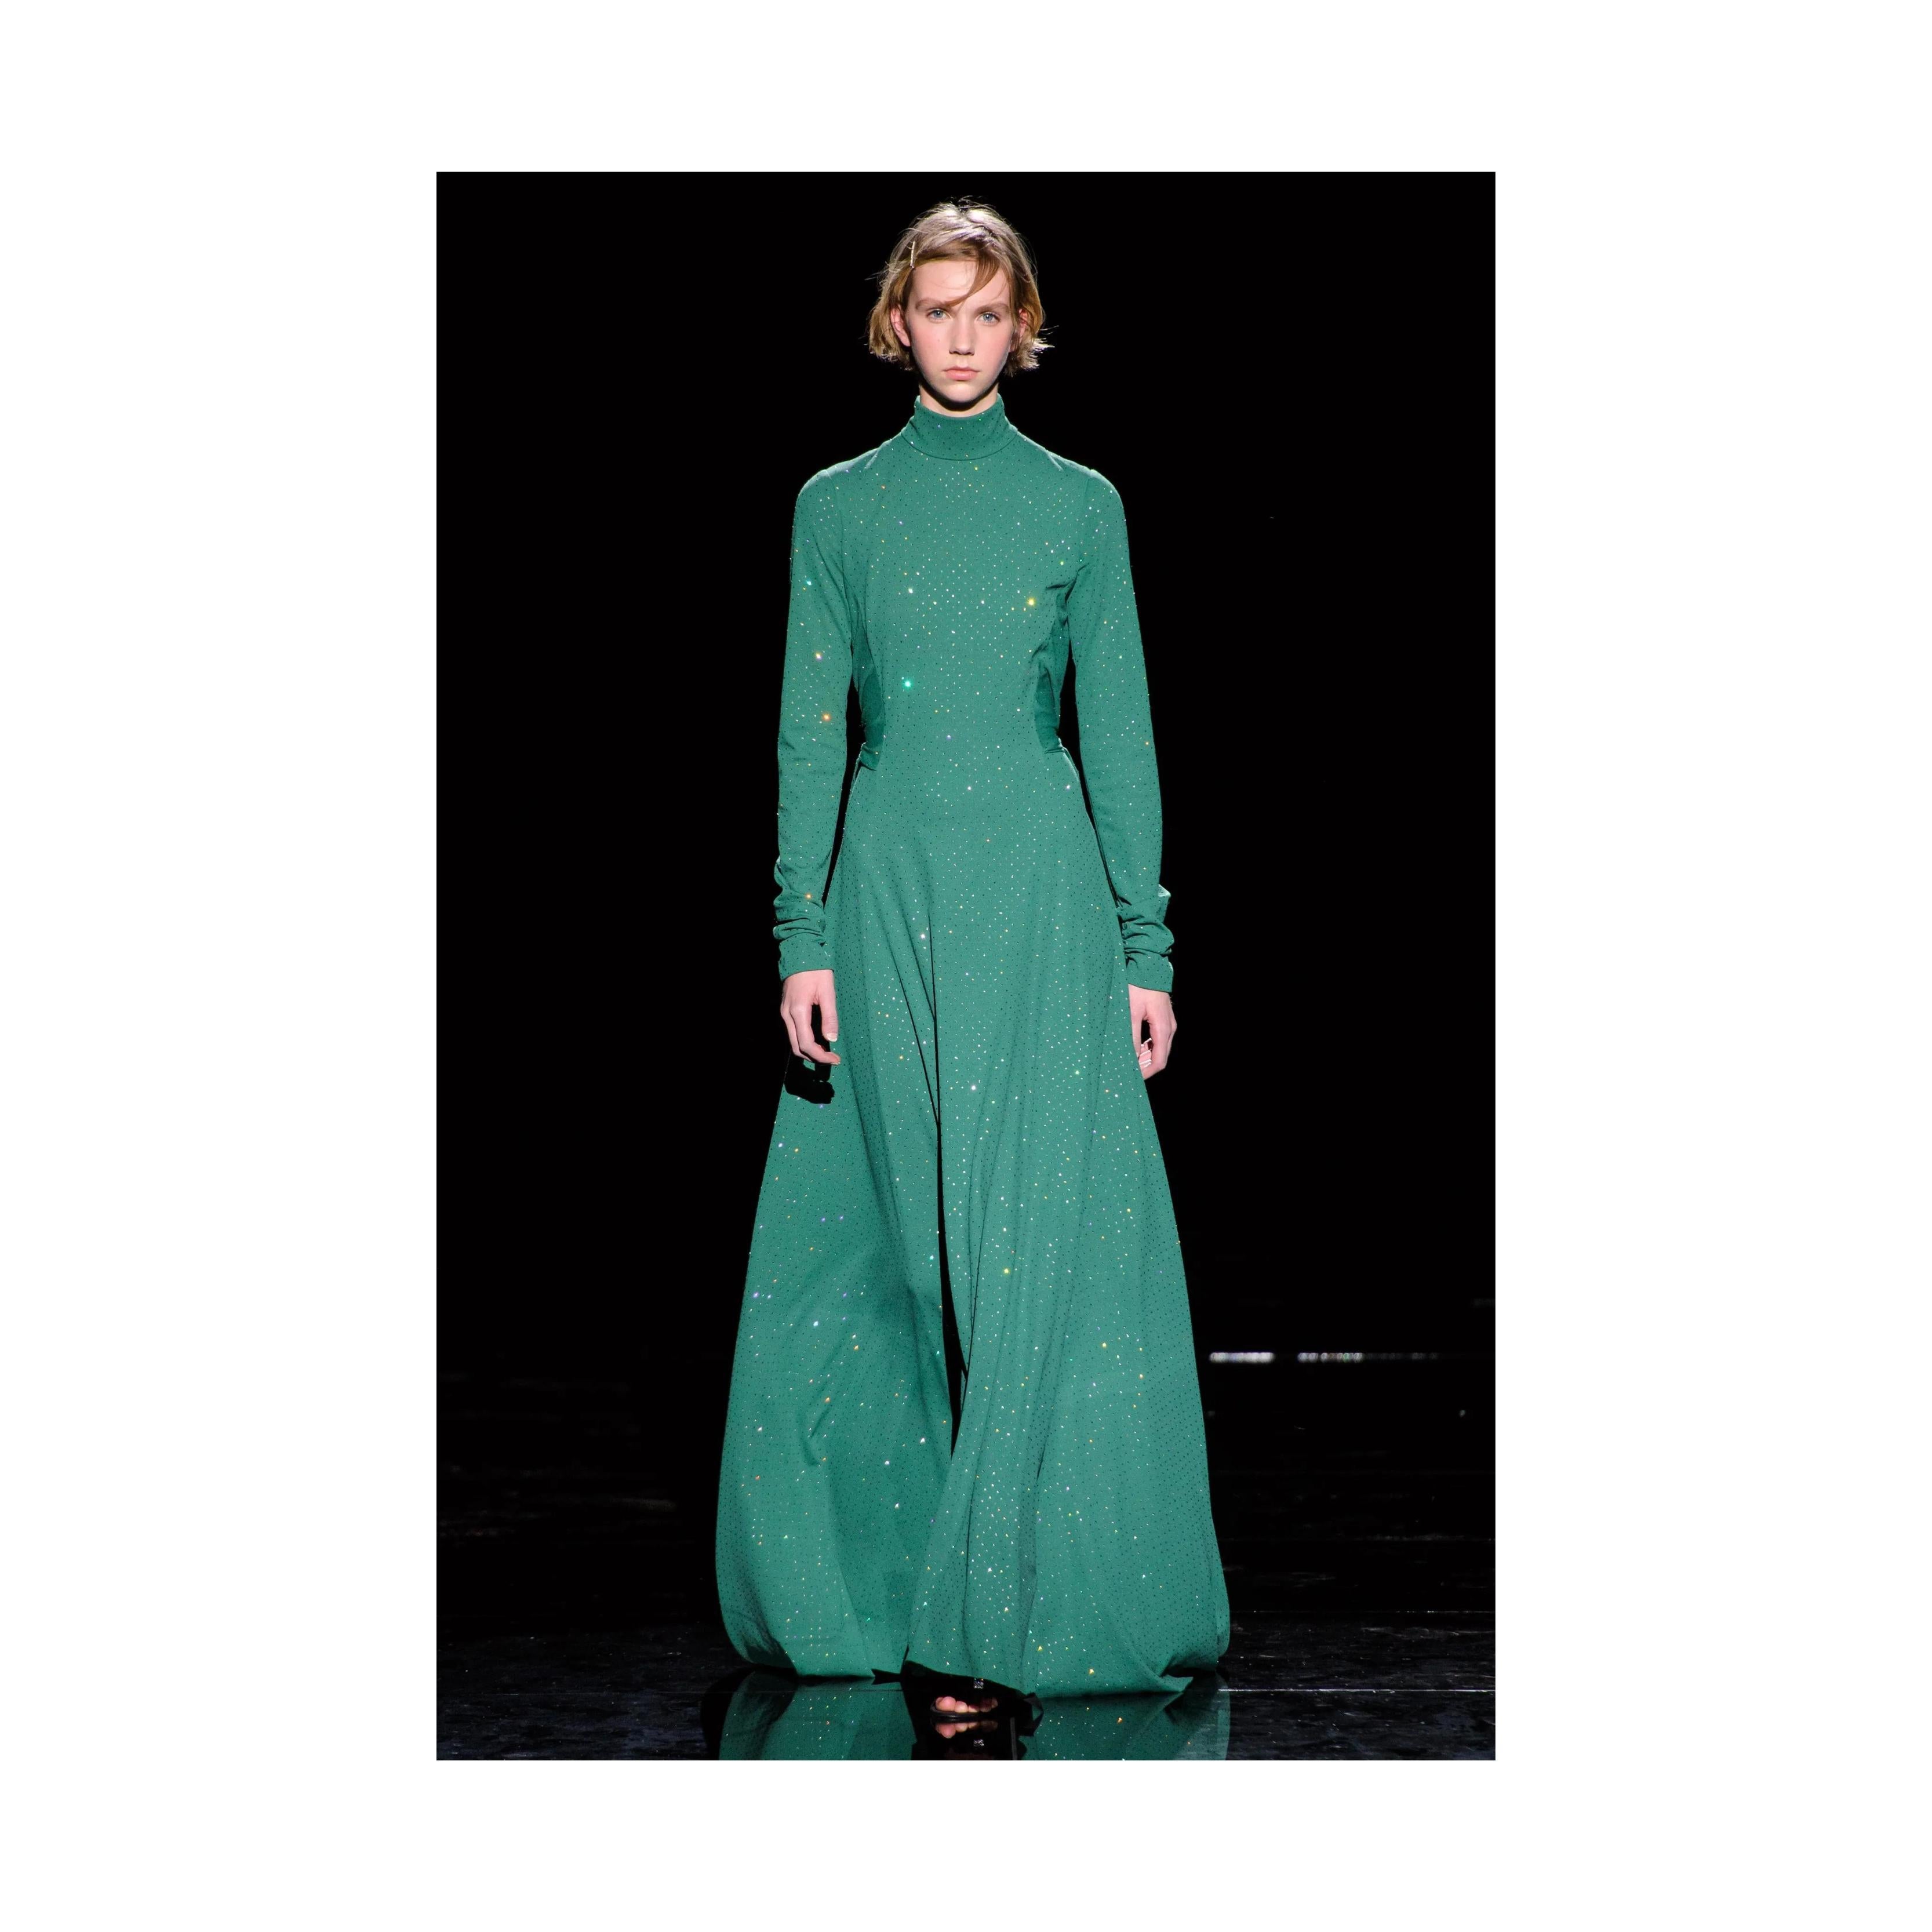 This stunning Marc Jacobs gown features a traditional long and flowy design with small crystal balls that subtly glimmer in the light. It also has an exaggerated feature of two long panels from the waist down that can be tied at the back, adding a